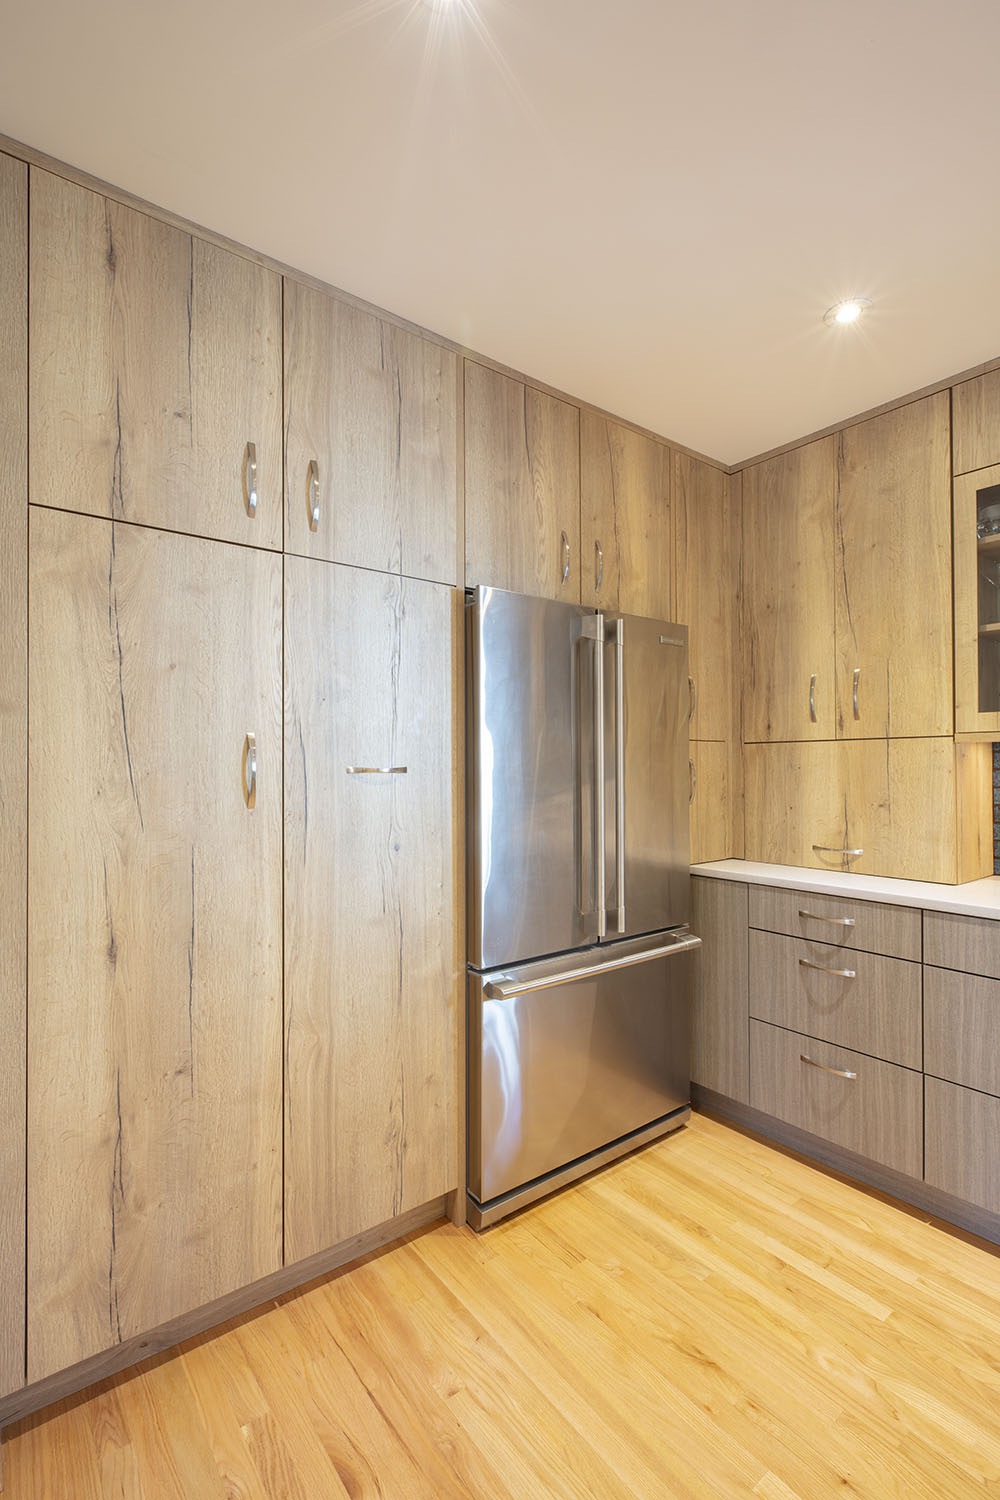 a stainless steel refrigerator surrounded by wood kitchen cabinets